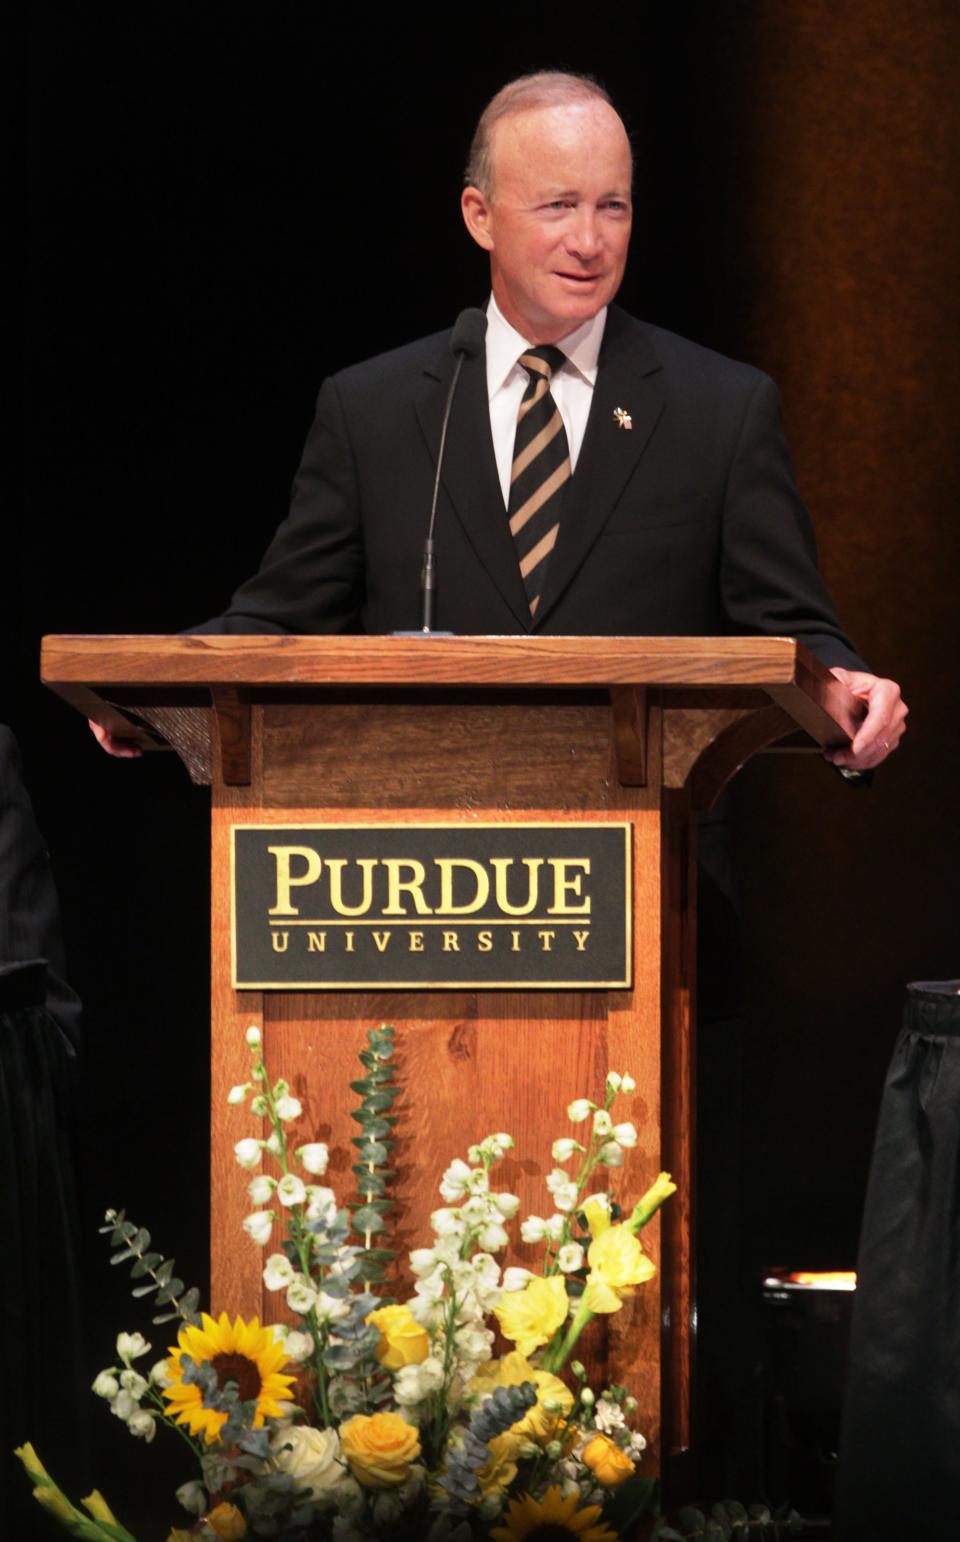 Purdue University President Mitch Daniels was paid $953,323 in 2022.